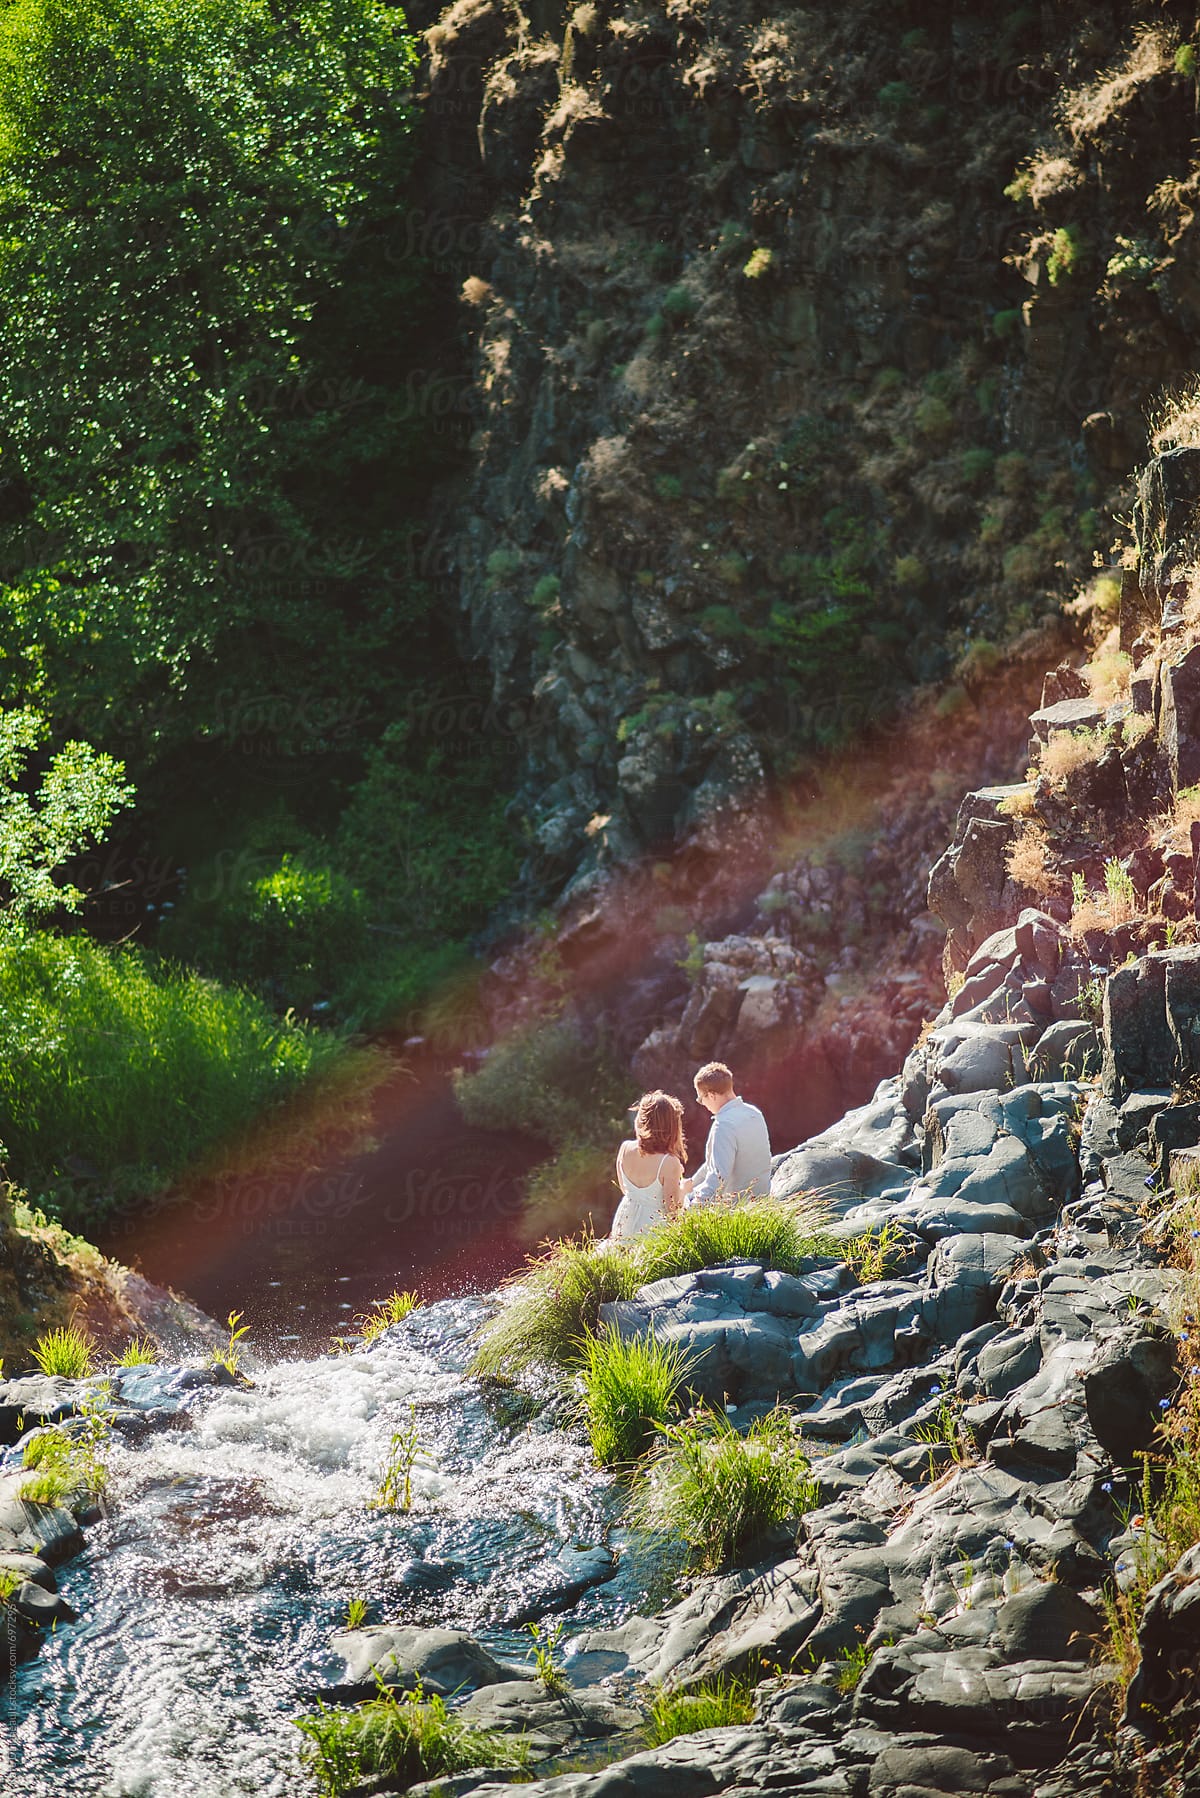 Young couple sitting on a cliff with a waterfall and a rainbow.